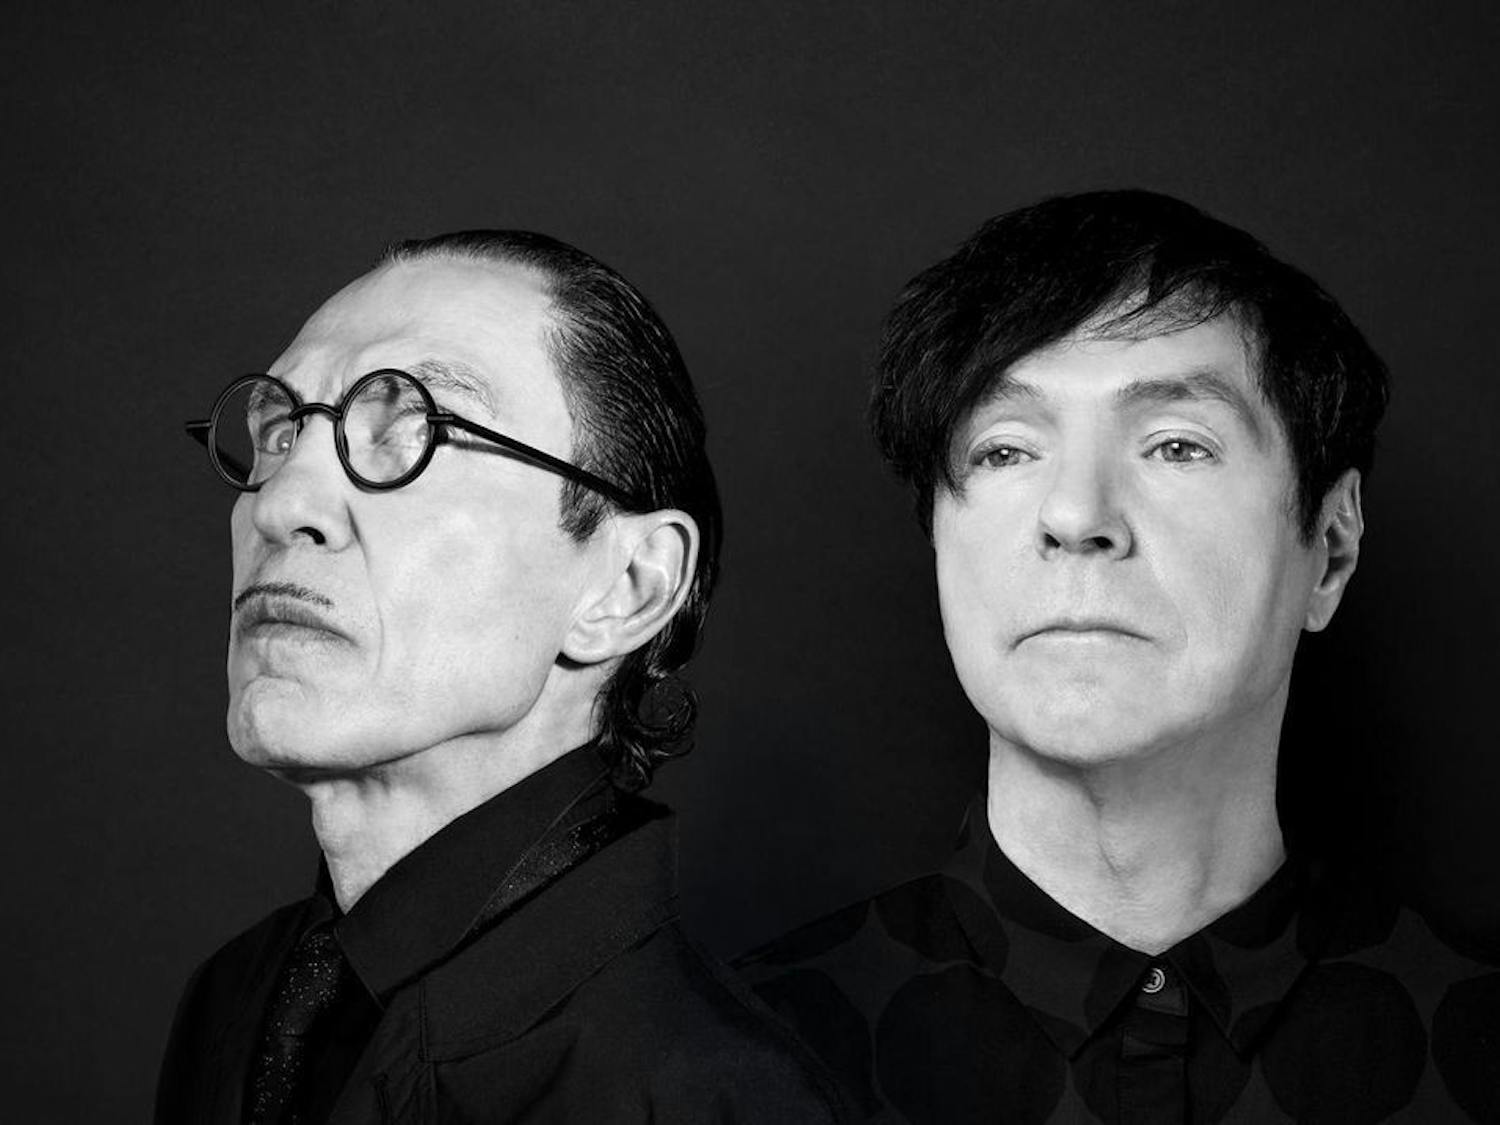 With a seemingly never-ending list of special guest stars, “The Sparks Brothers” gathers the most unlikely celebrities to showcase Ron and Russell Mael’s otherworldly 50-year career as the band Sparks. (Courtesy to The Alligator)